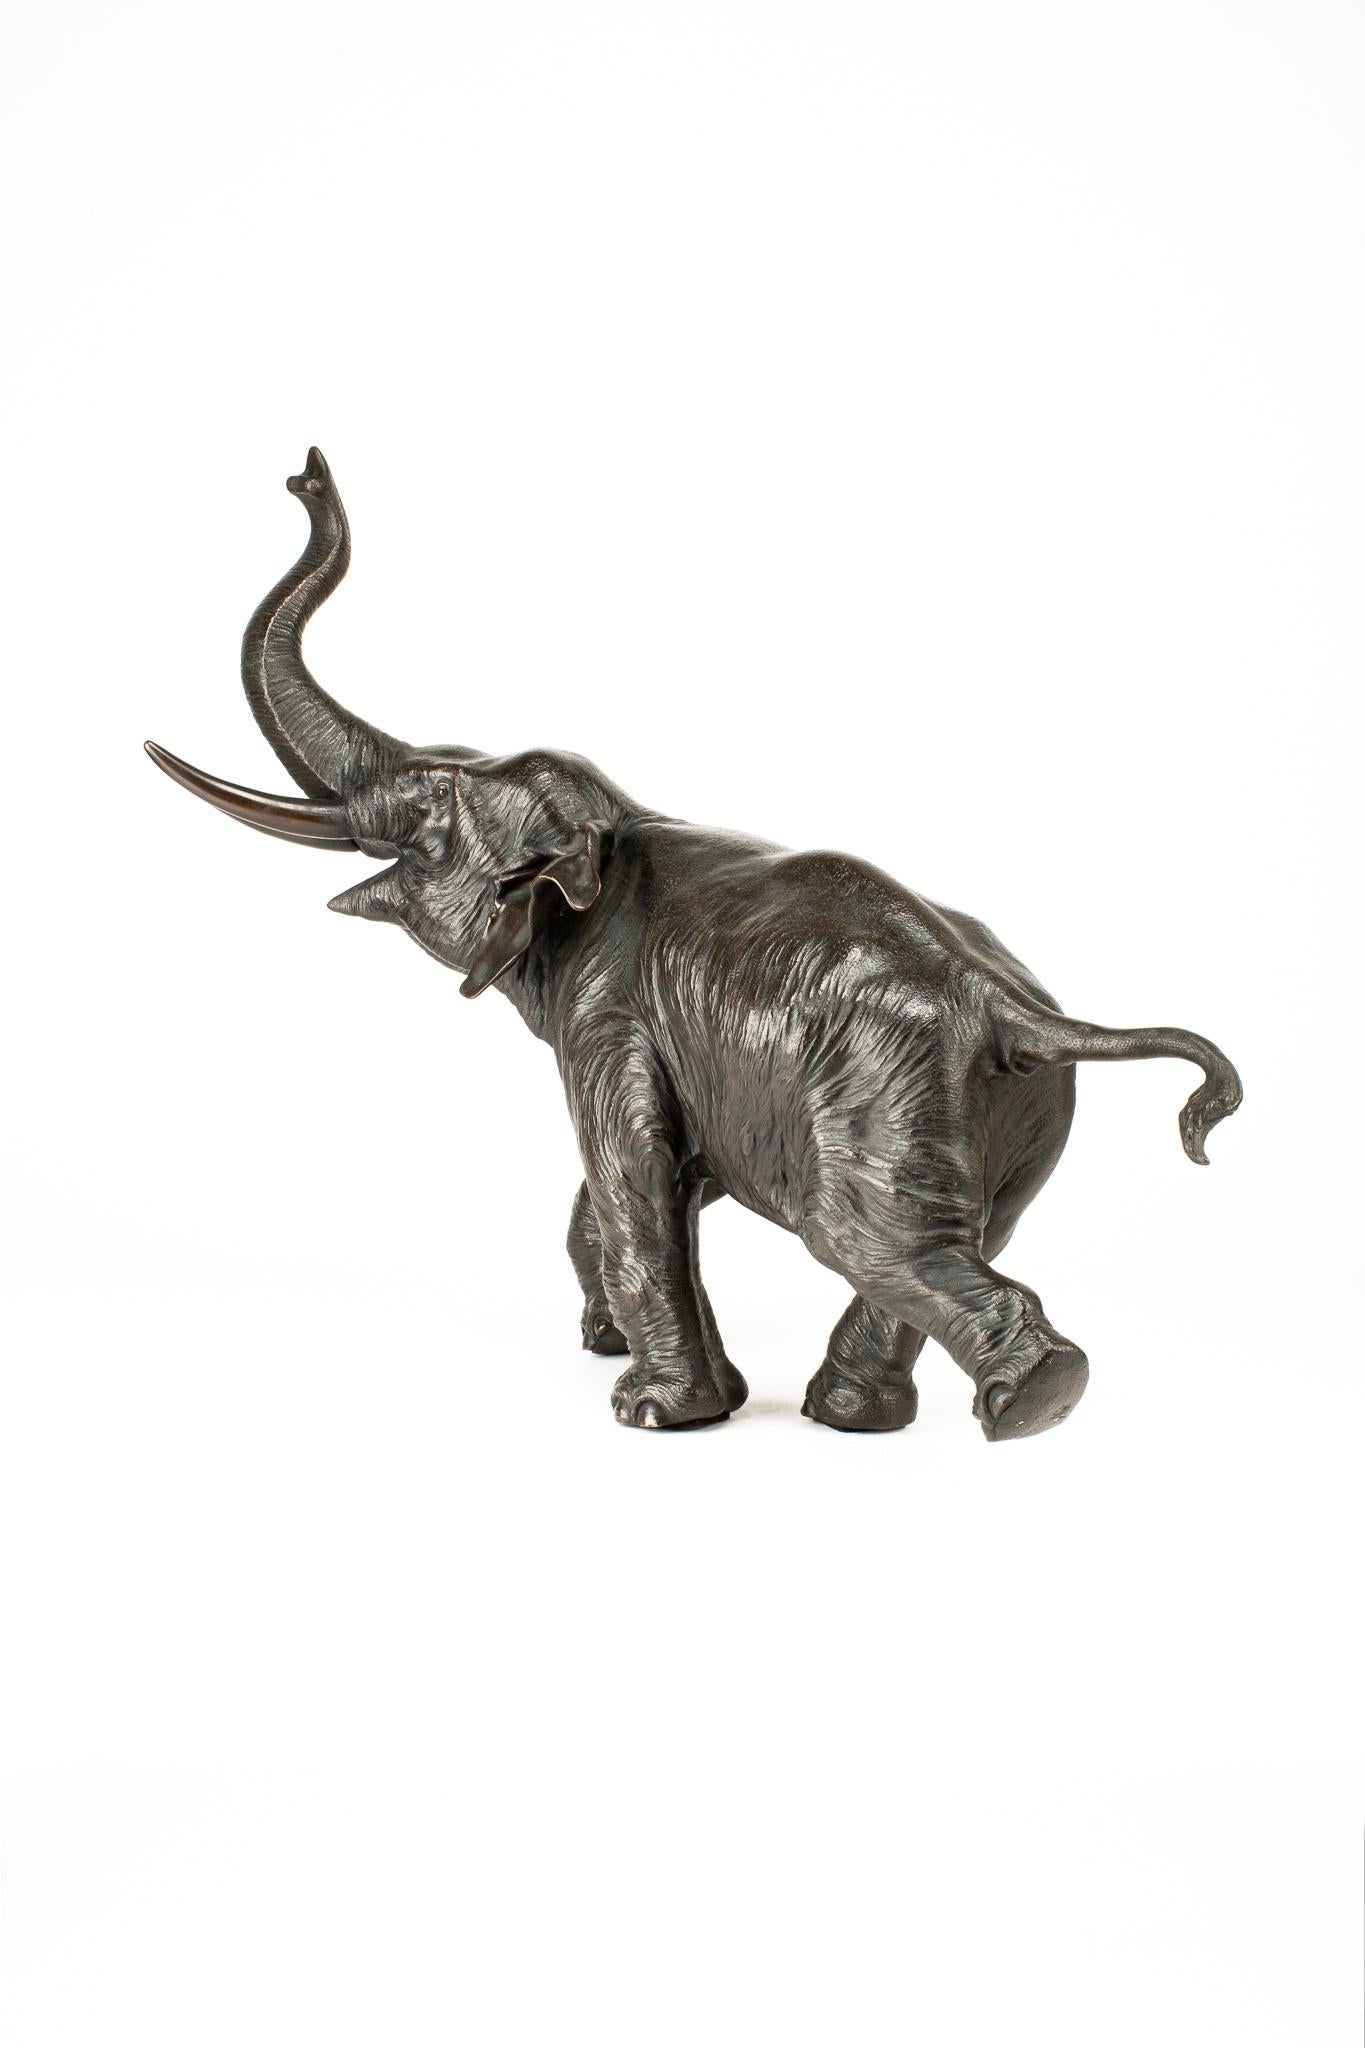 19th Century A Japanese bronze sculpture depicting a running elephant with its raised trunk